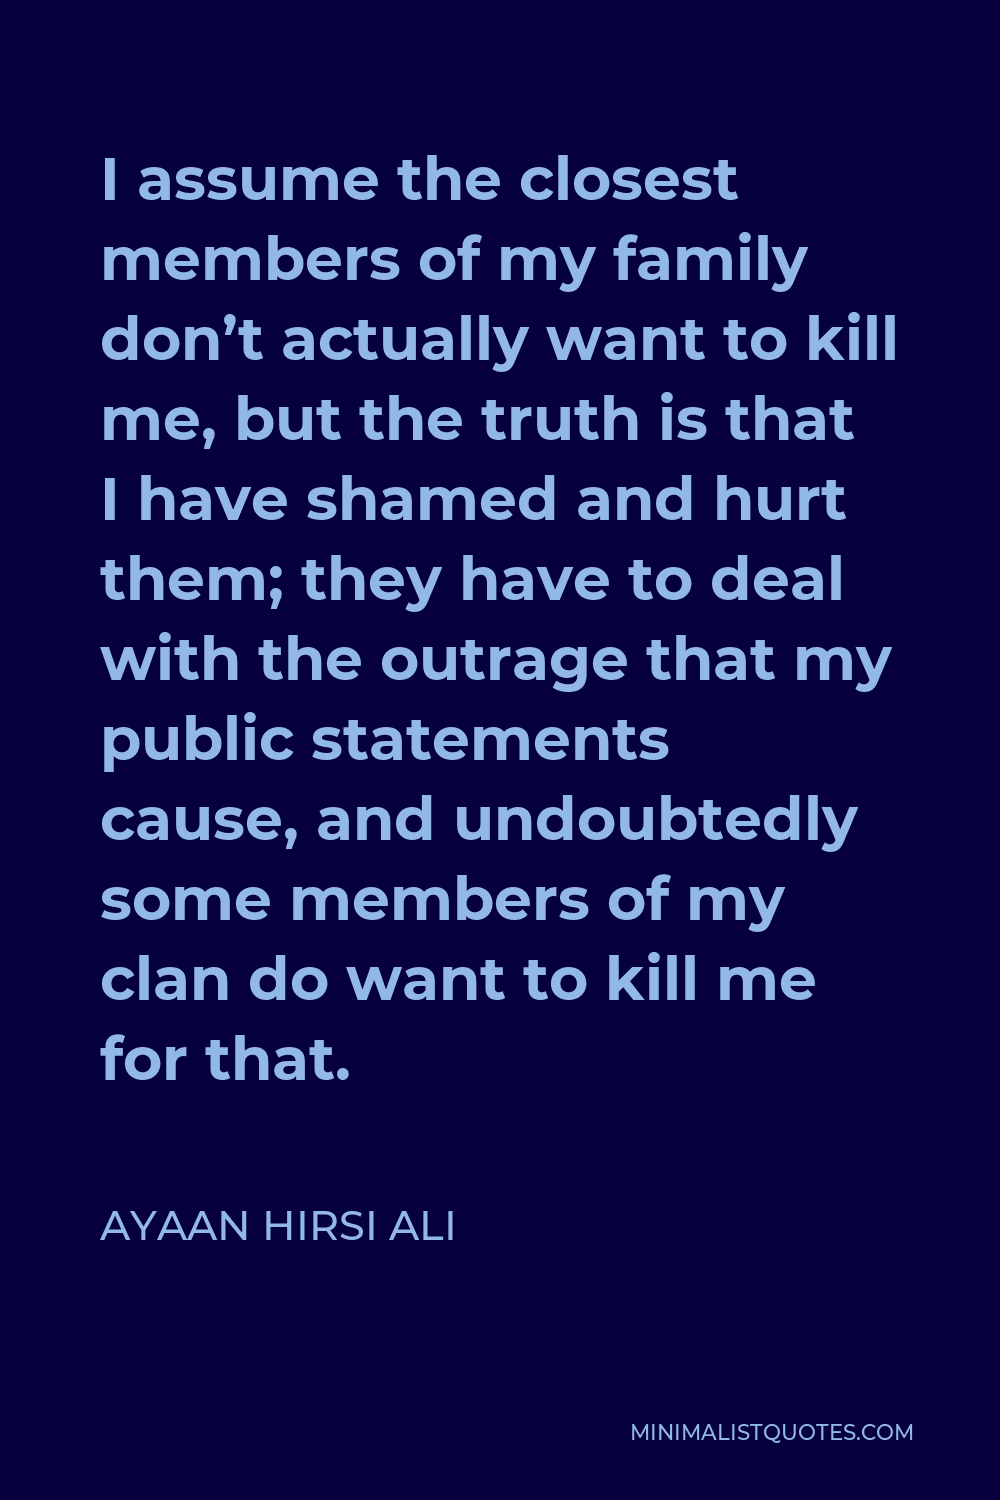 Ayaan Hirsi Ali Quote - I assume the closest members of my family don’t actually want to kill me, but the truth is that I have shamed and hurt them; they have to deal with the outrage that my public statements cause, and undoubtedly some members of my clan do want to kill me for that.